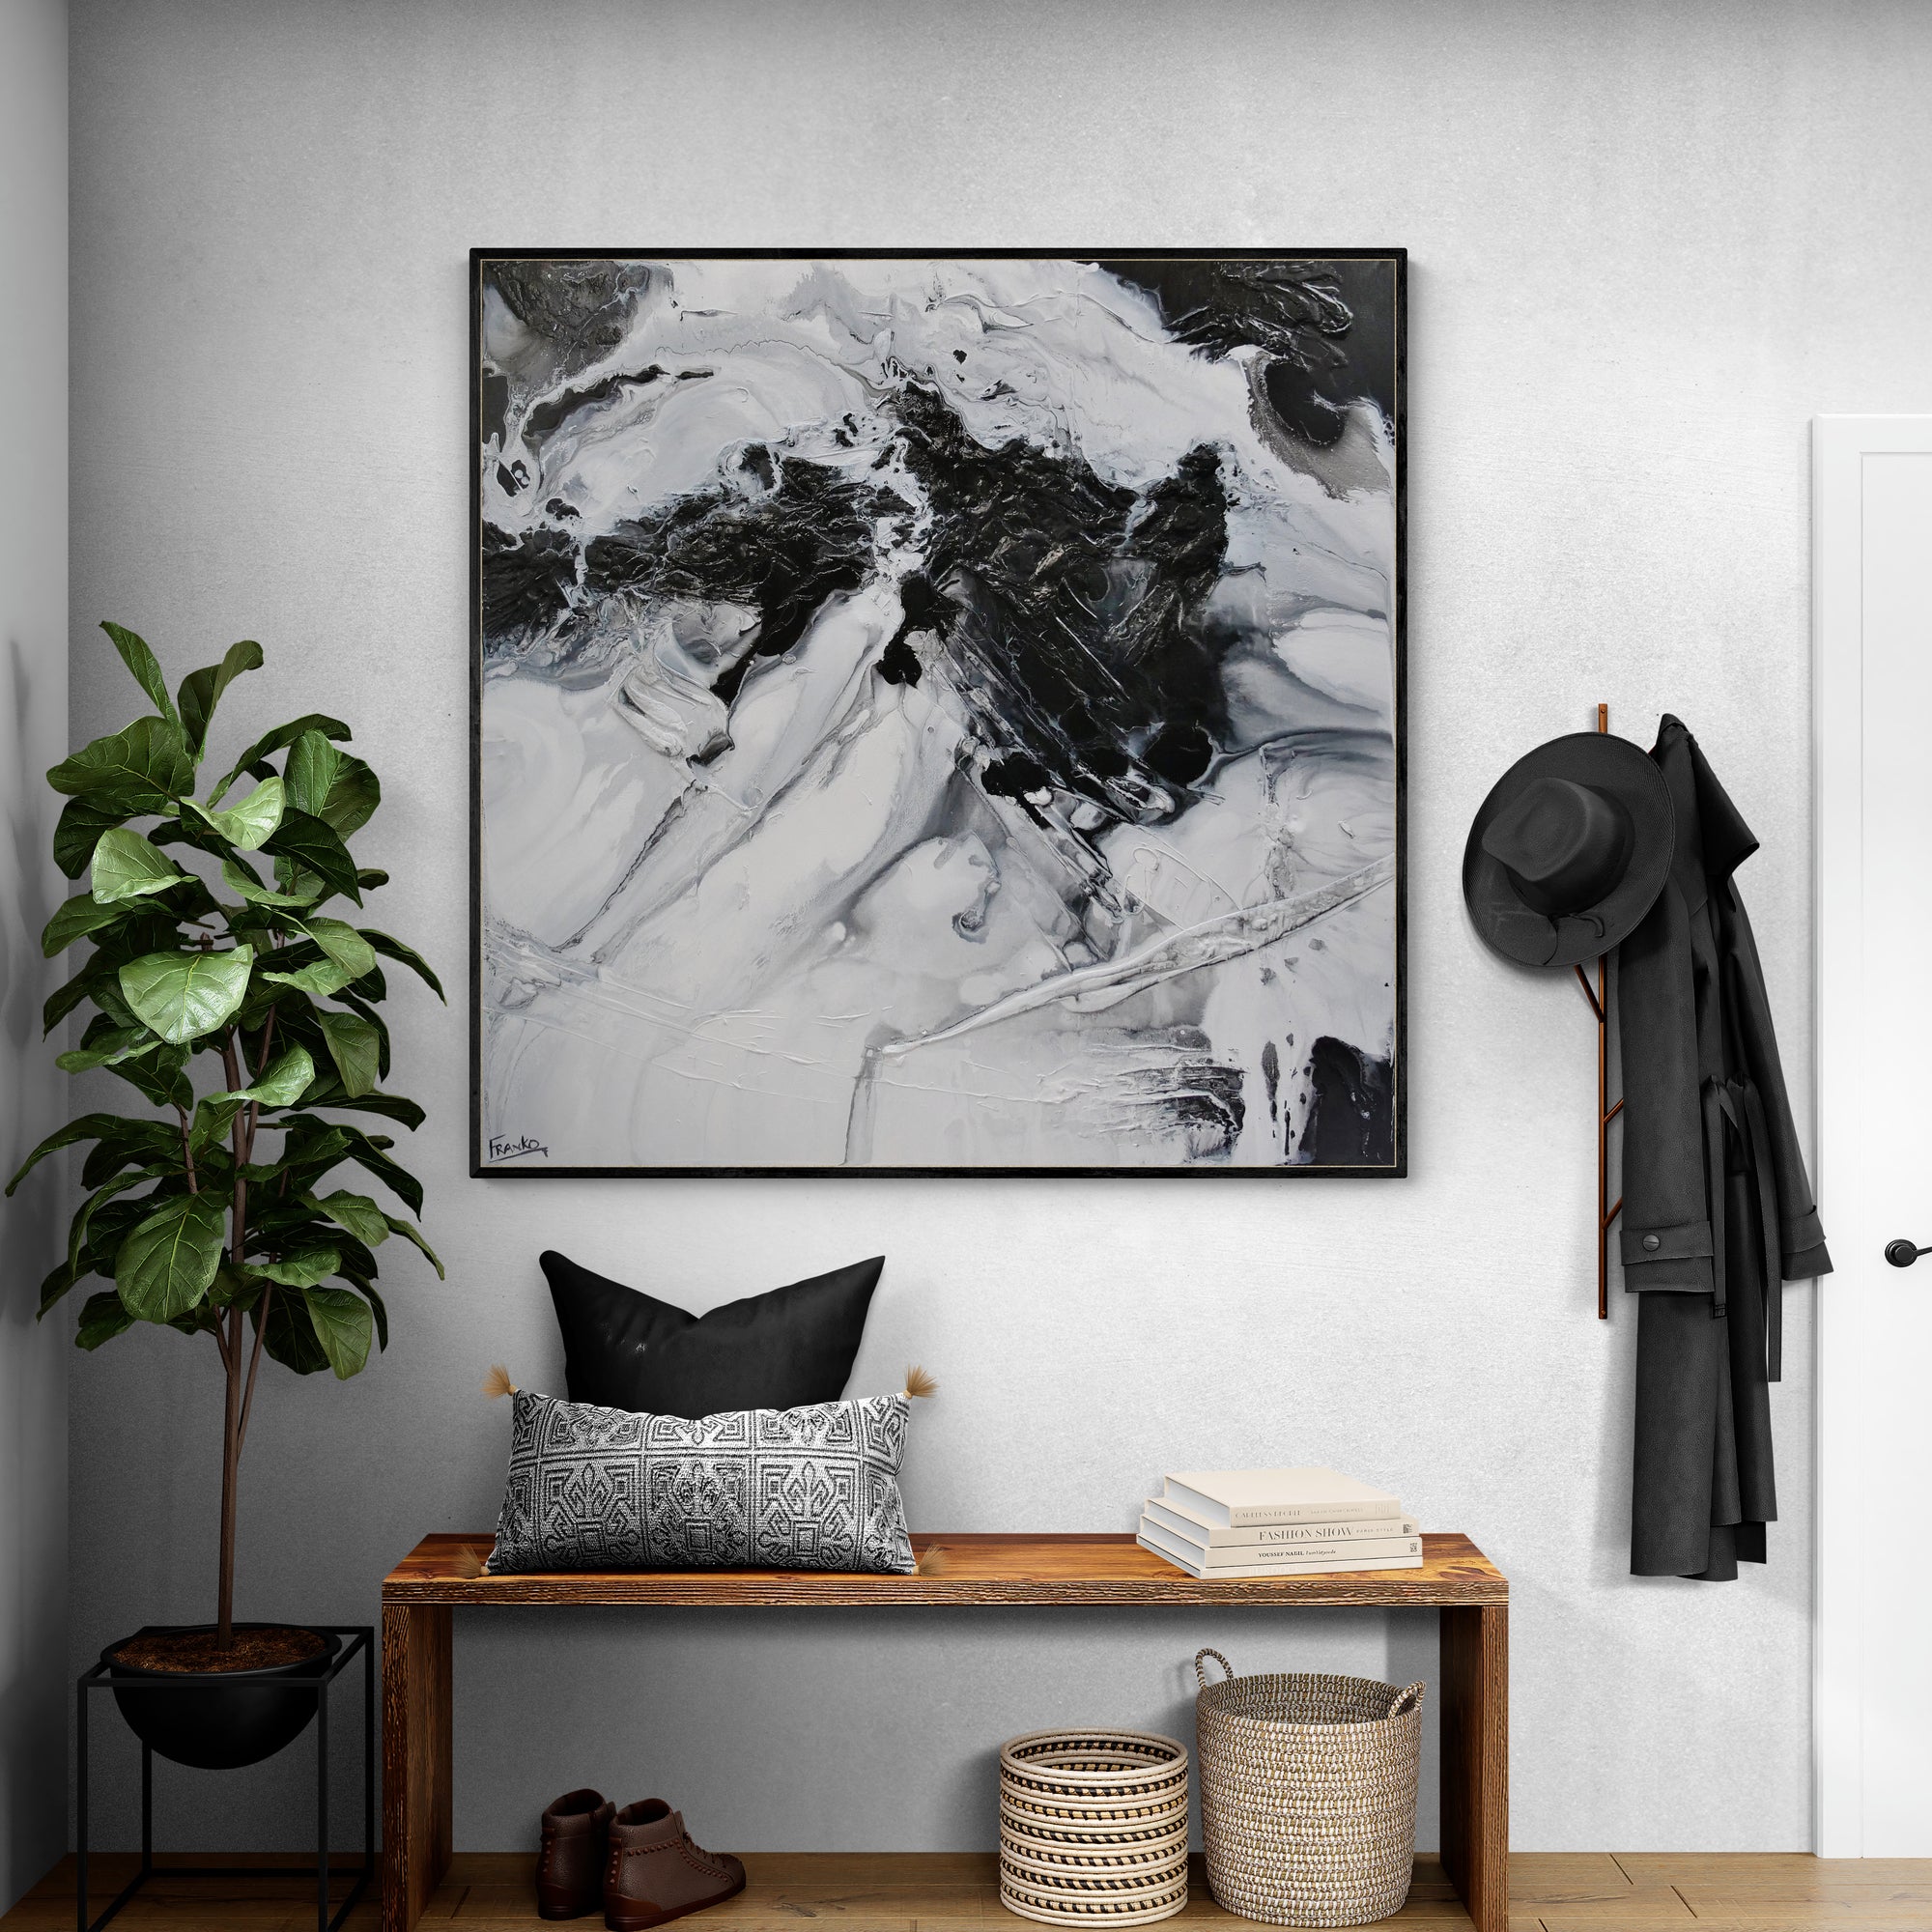 Atmosphere 120cm x 120cm Black White Textured Abstract Painting